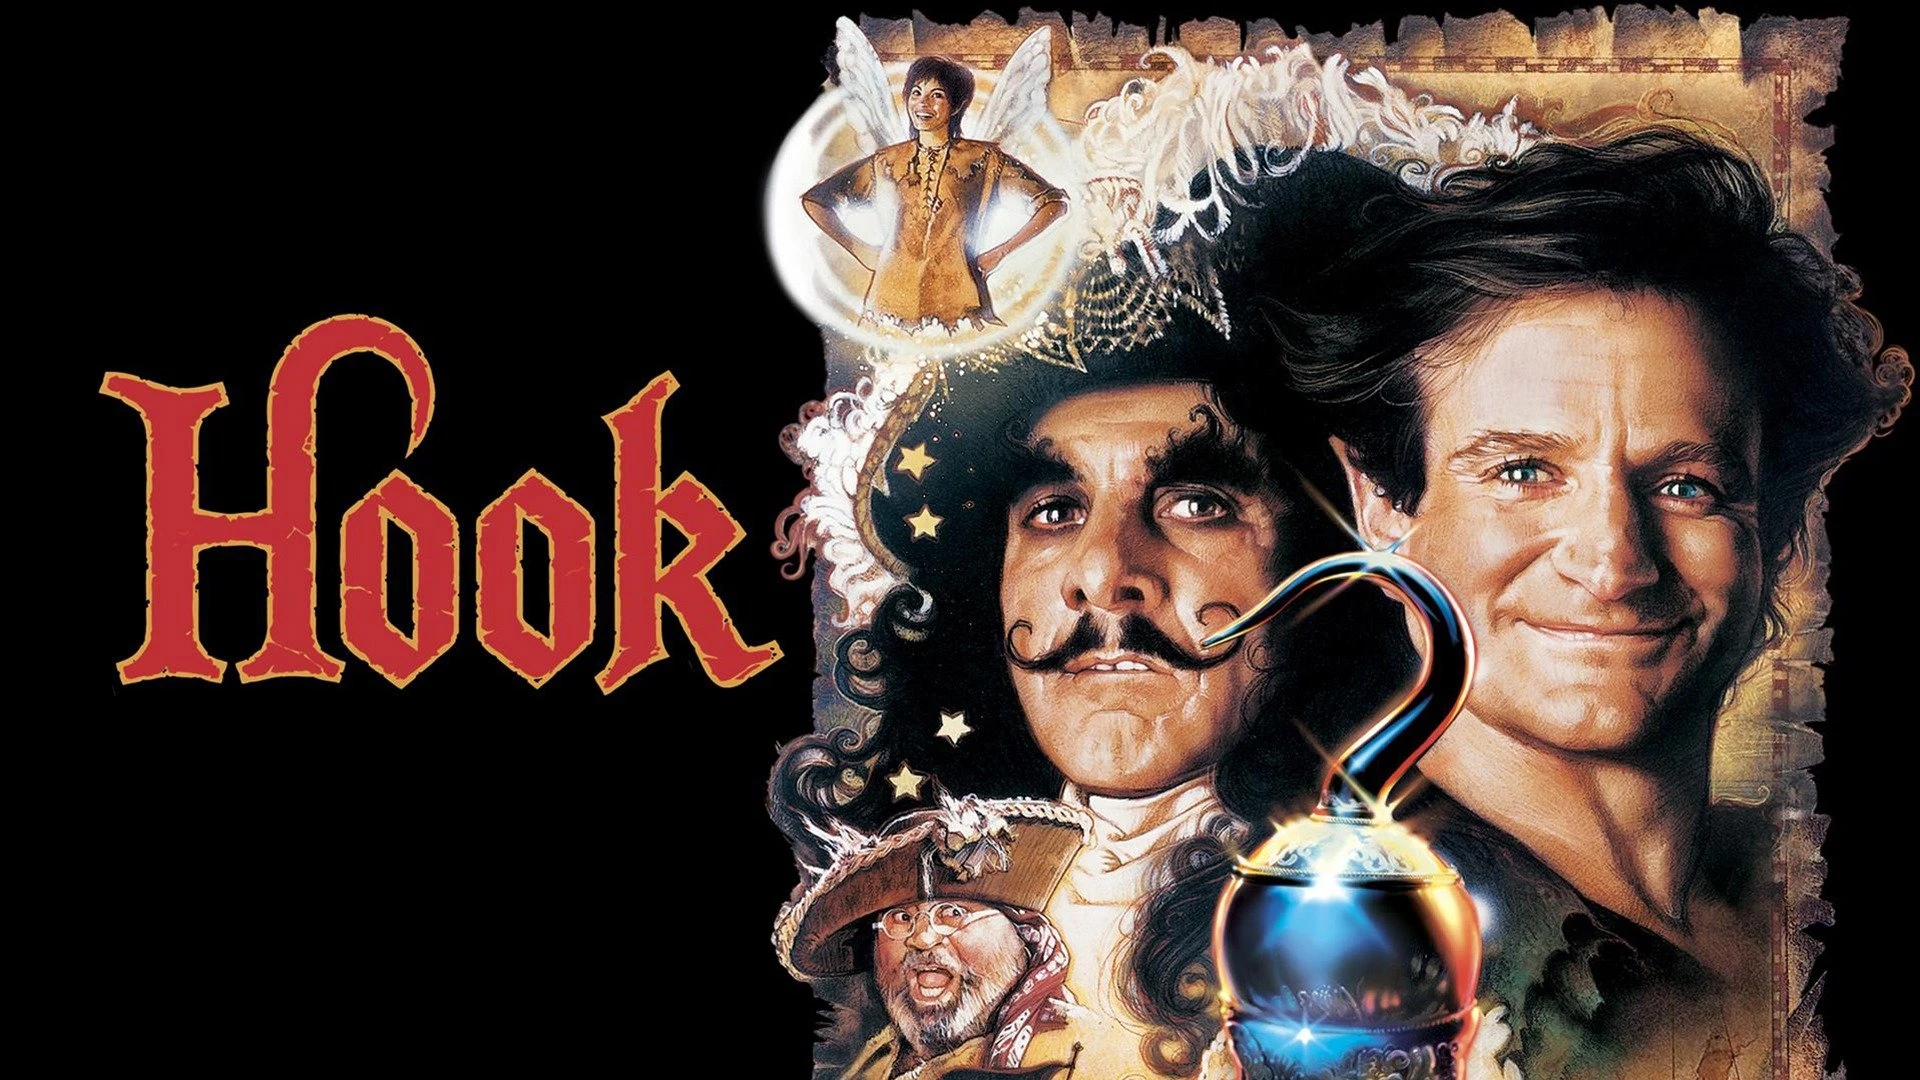 movies like pirates of the caribbean - Hook (1991)